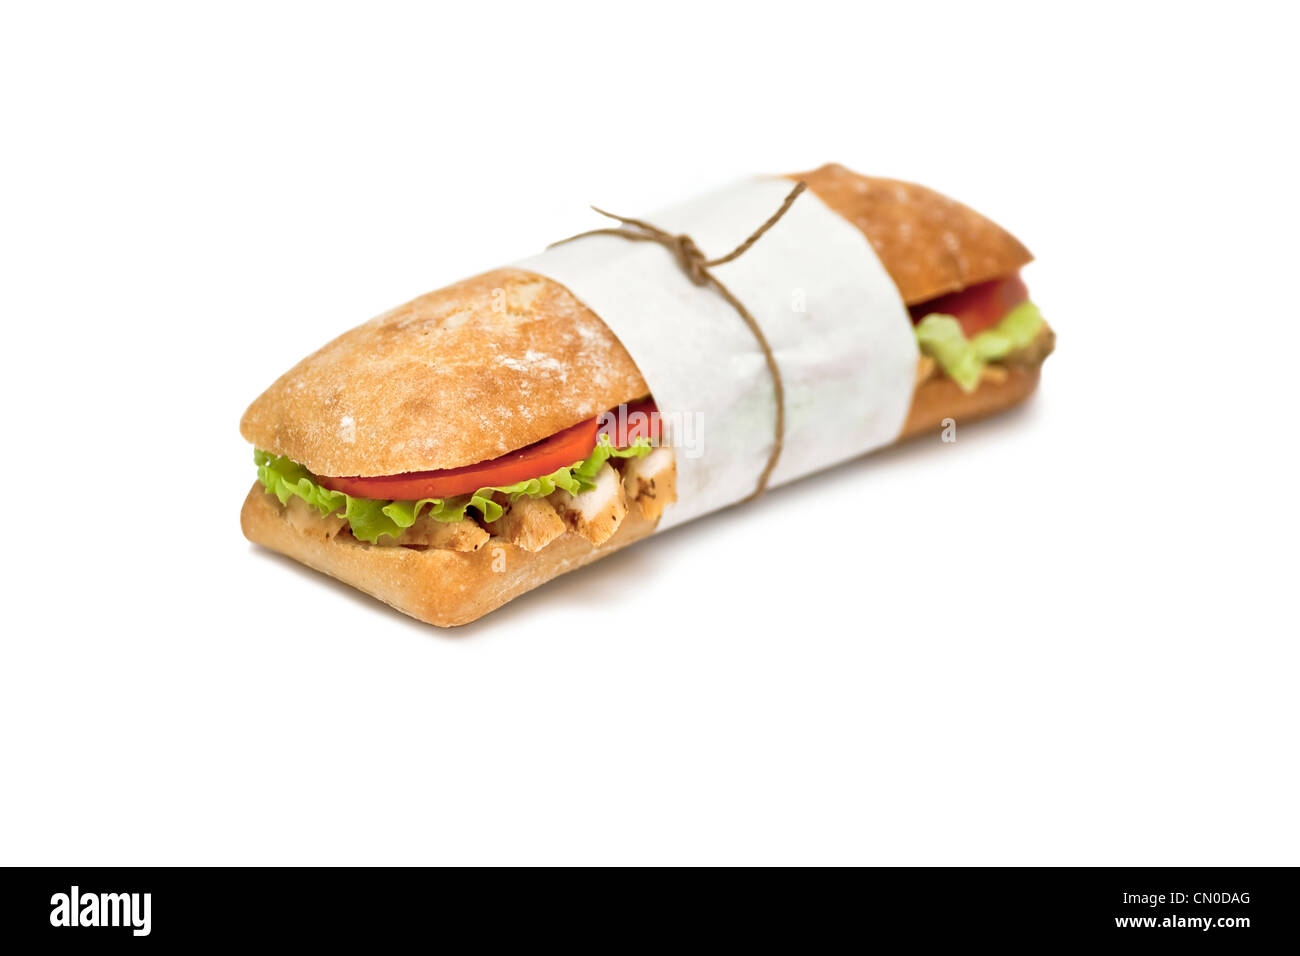 A sandwich with meat, salad and tomatoes wrapped in a paper on a white background Stock Photo